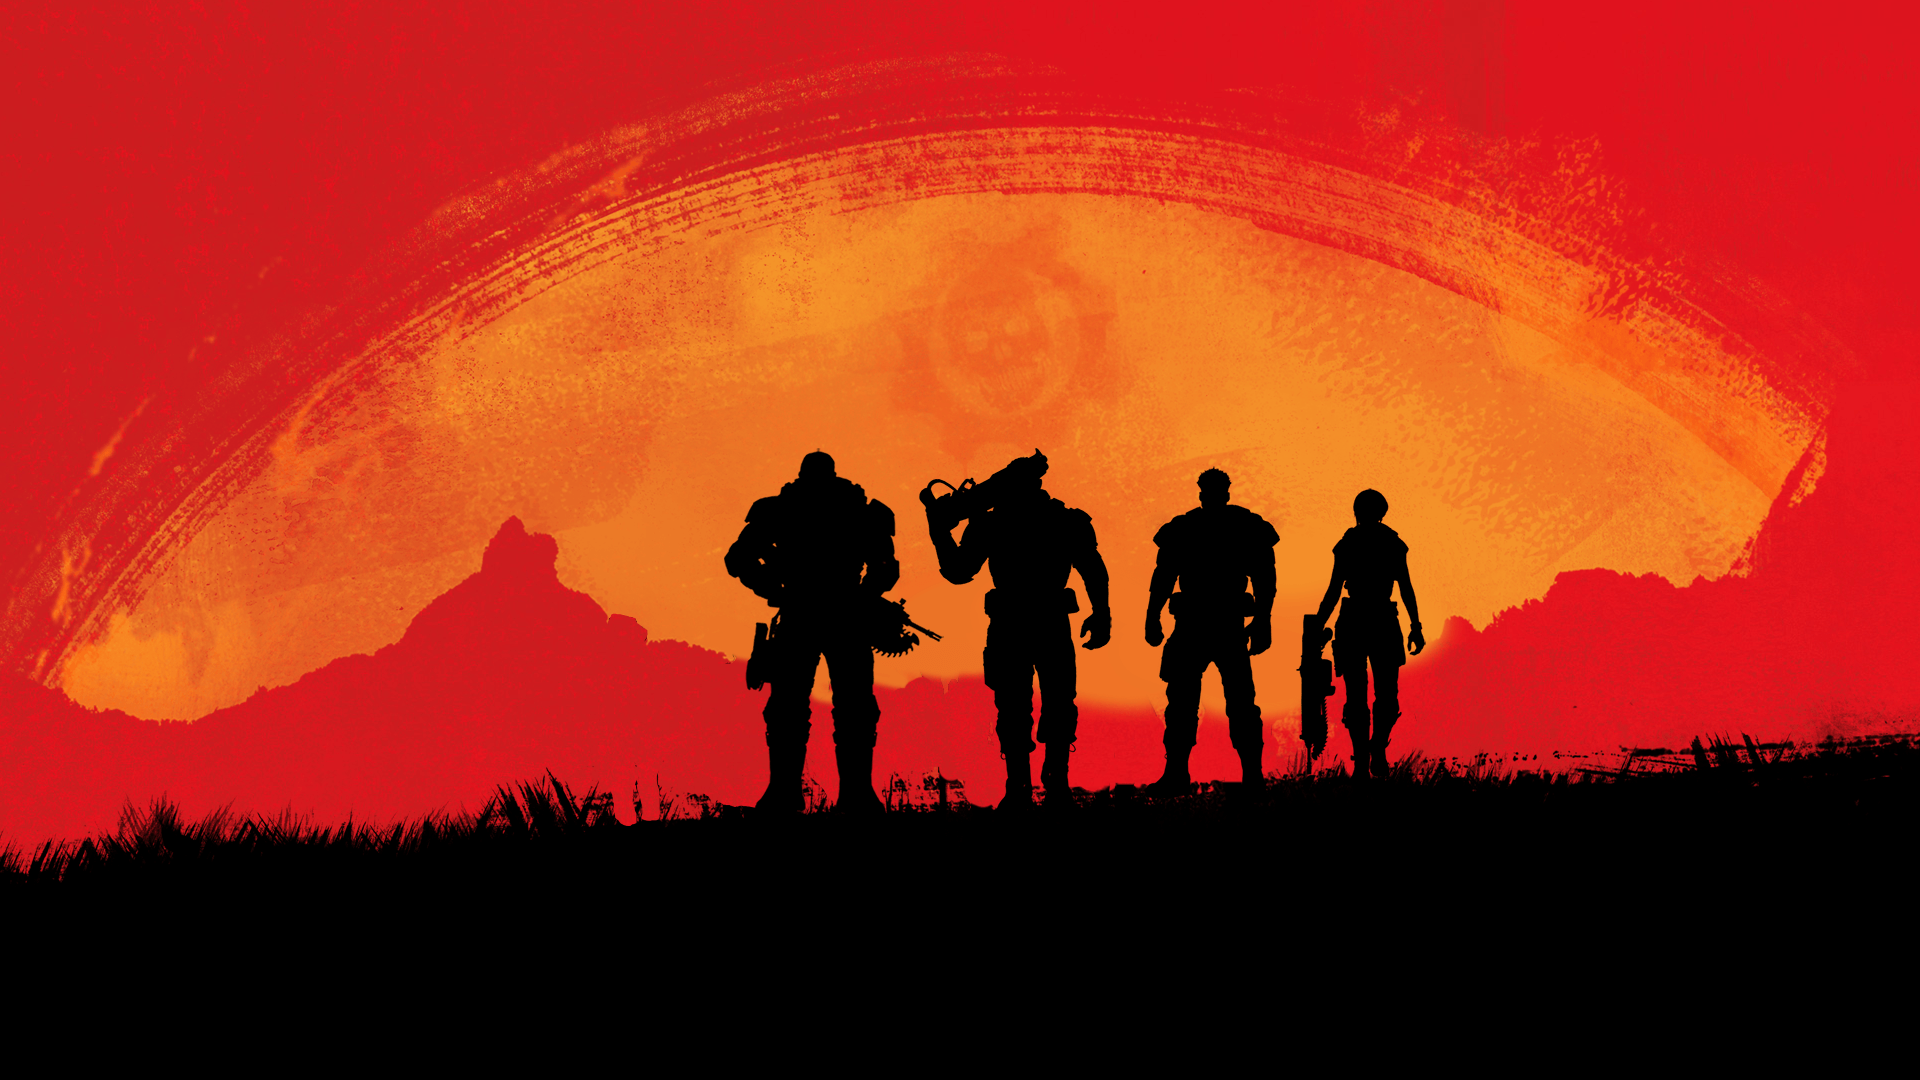 Red Dead Redemption 2 Wallpapers.